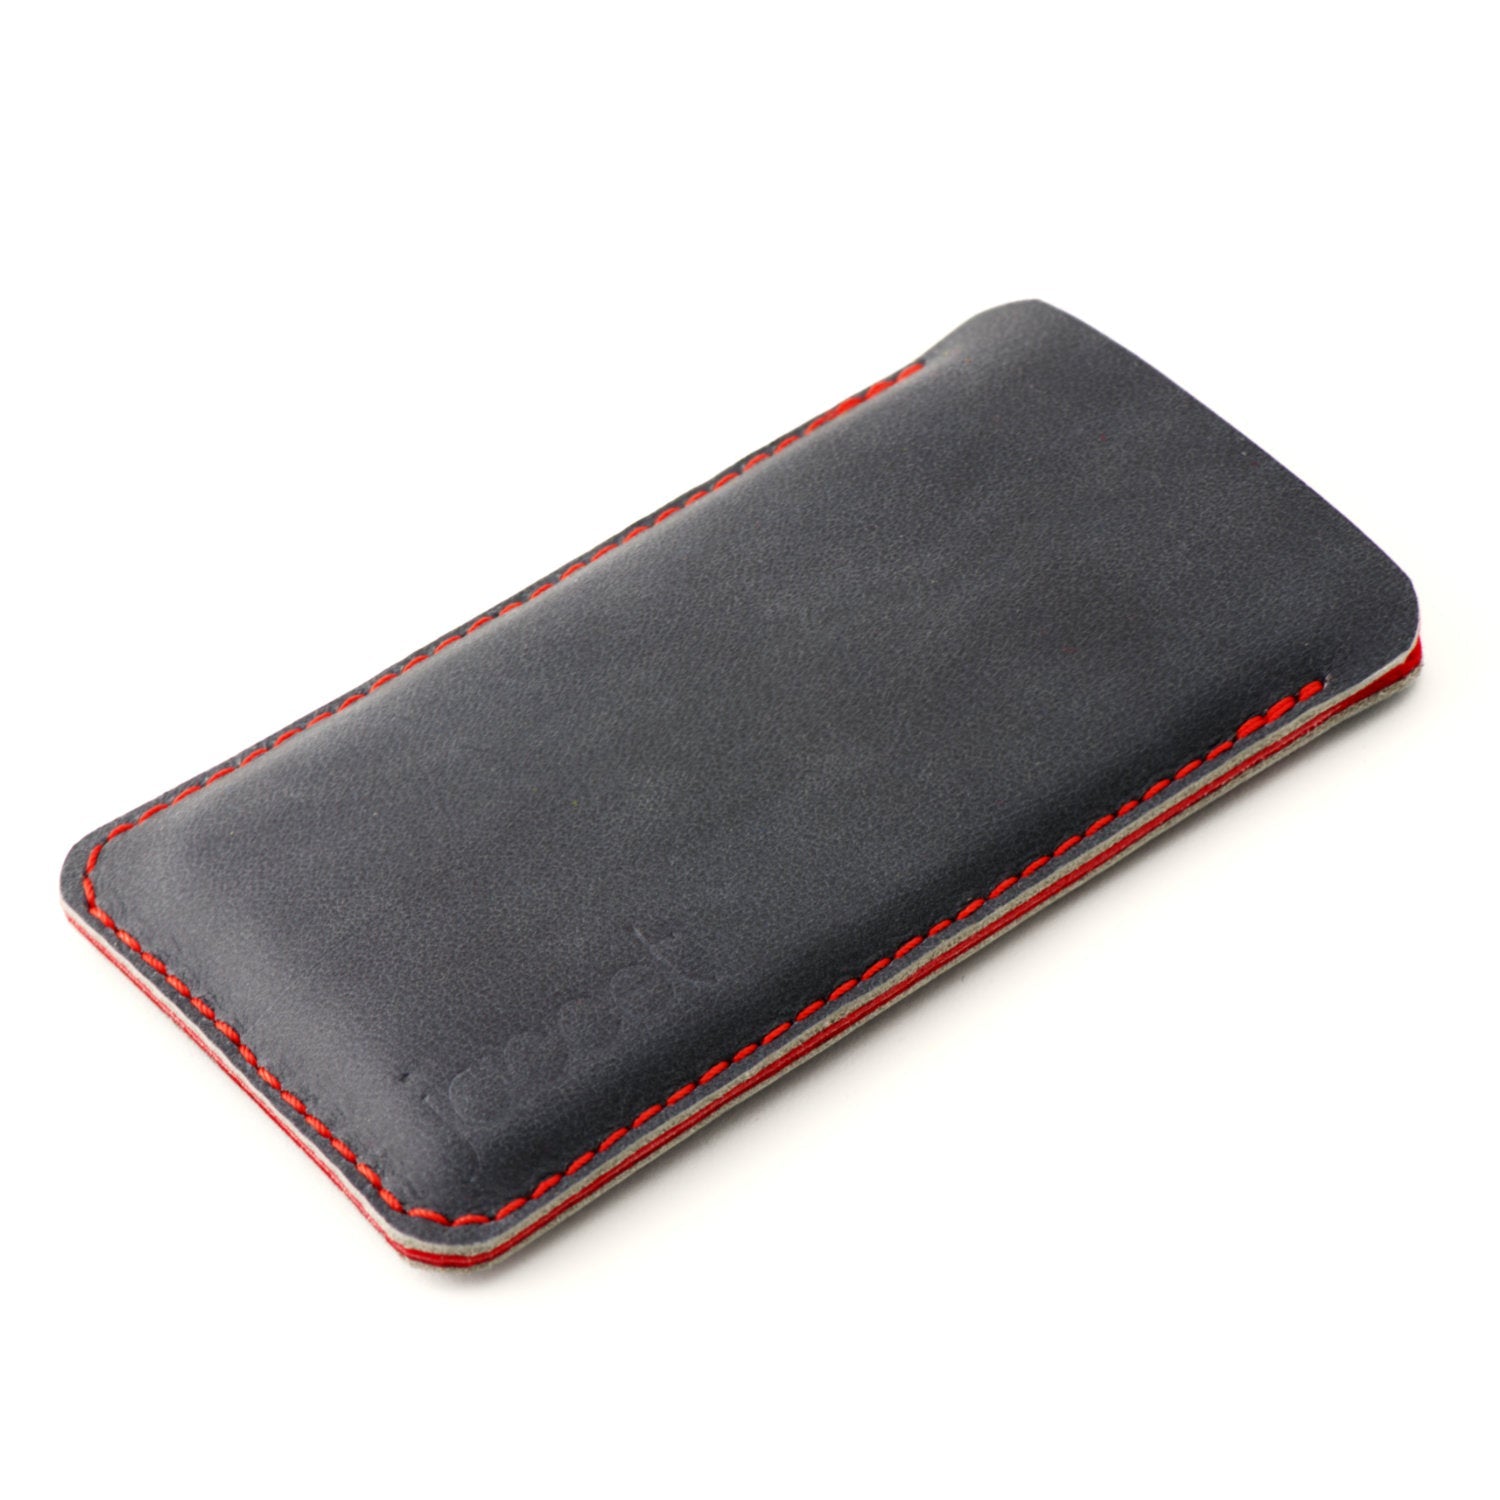 JACCET leather Sony Xperia sleeve - anthracite/black leather with red wool felt. 100% Handmade